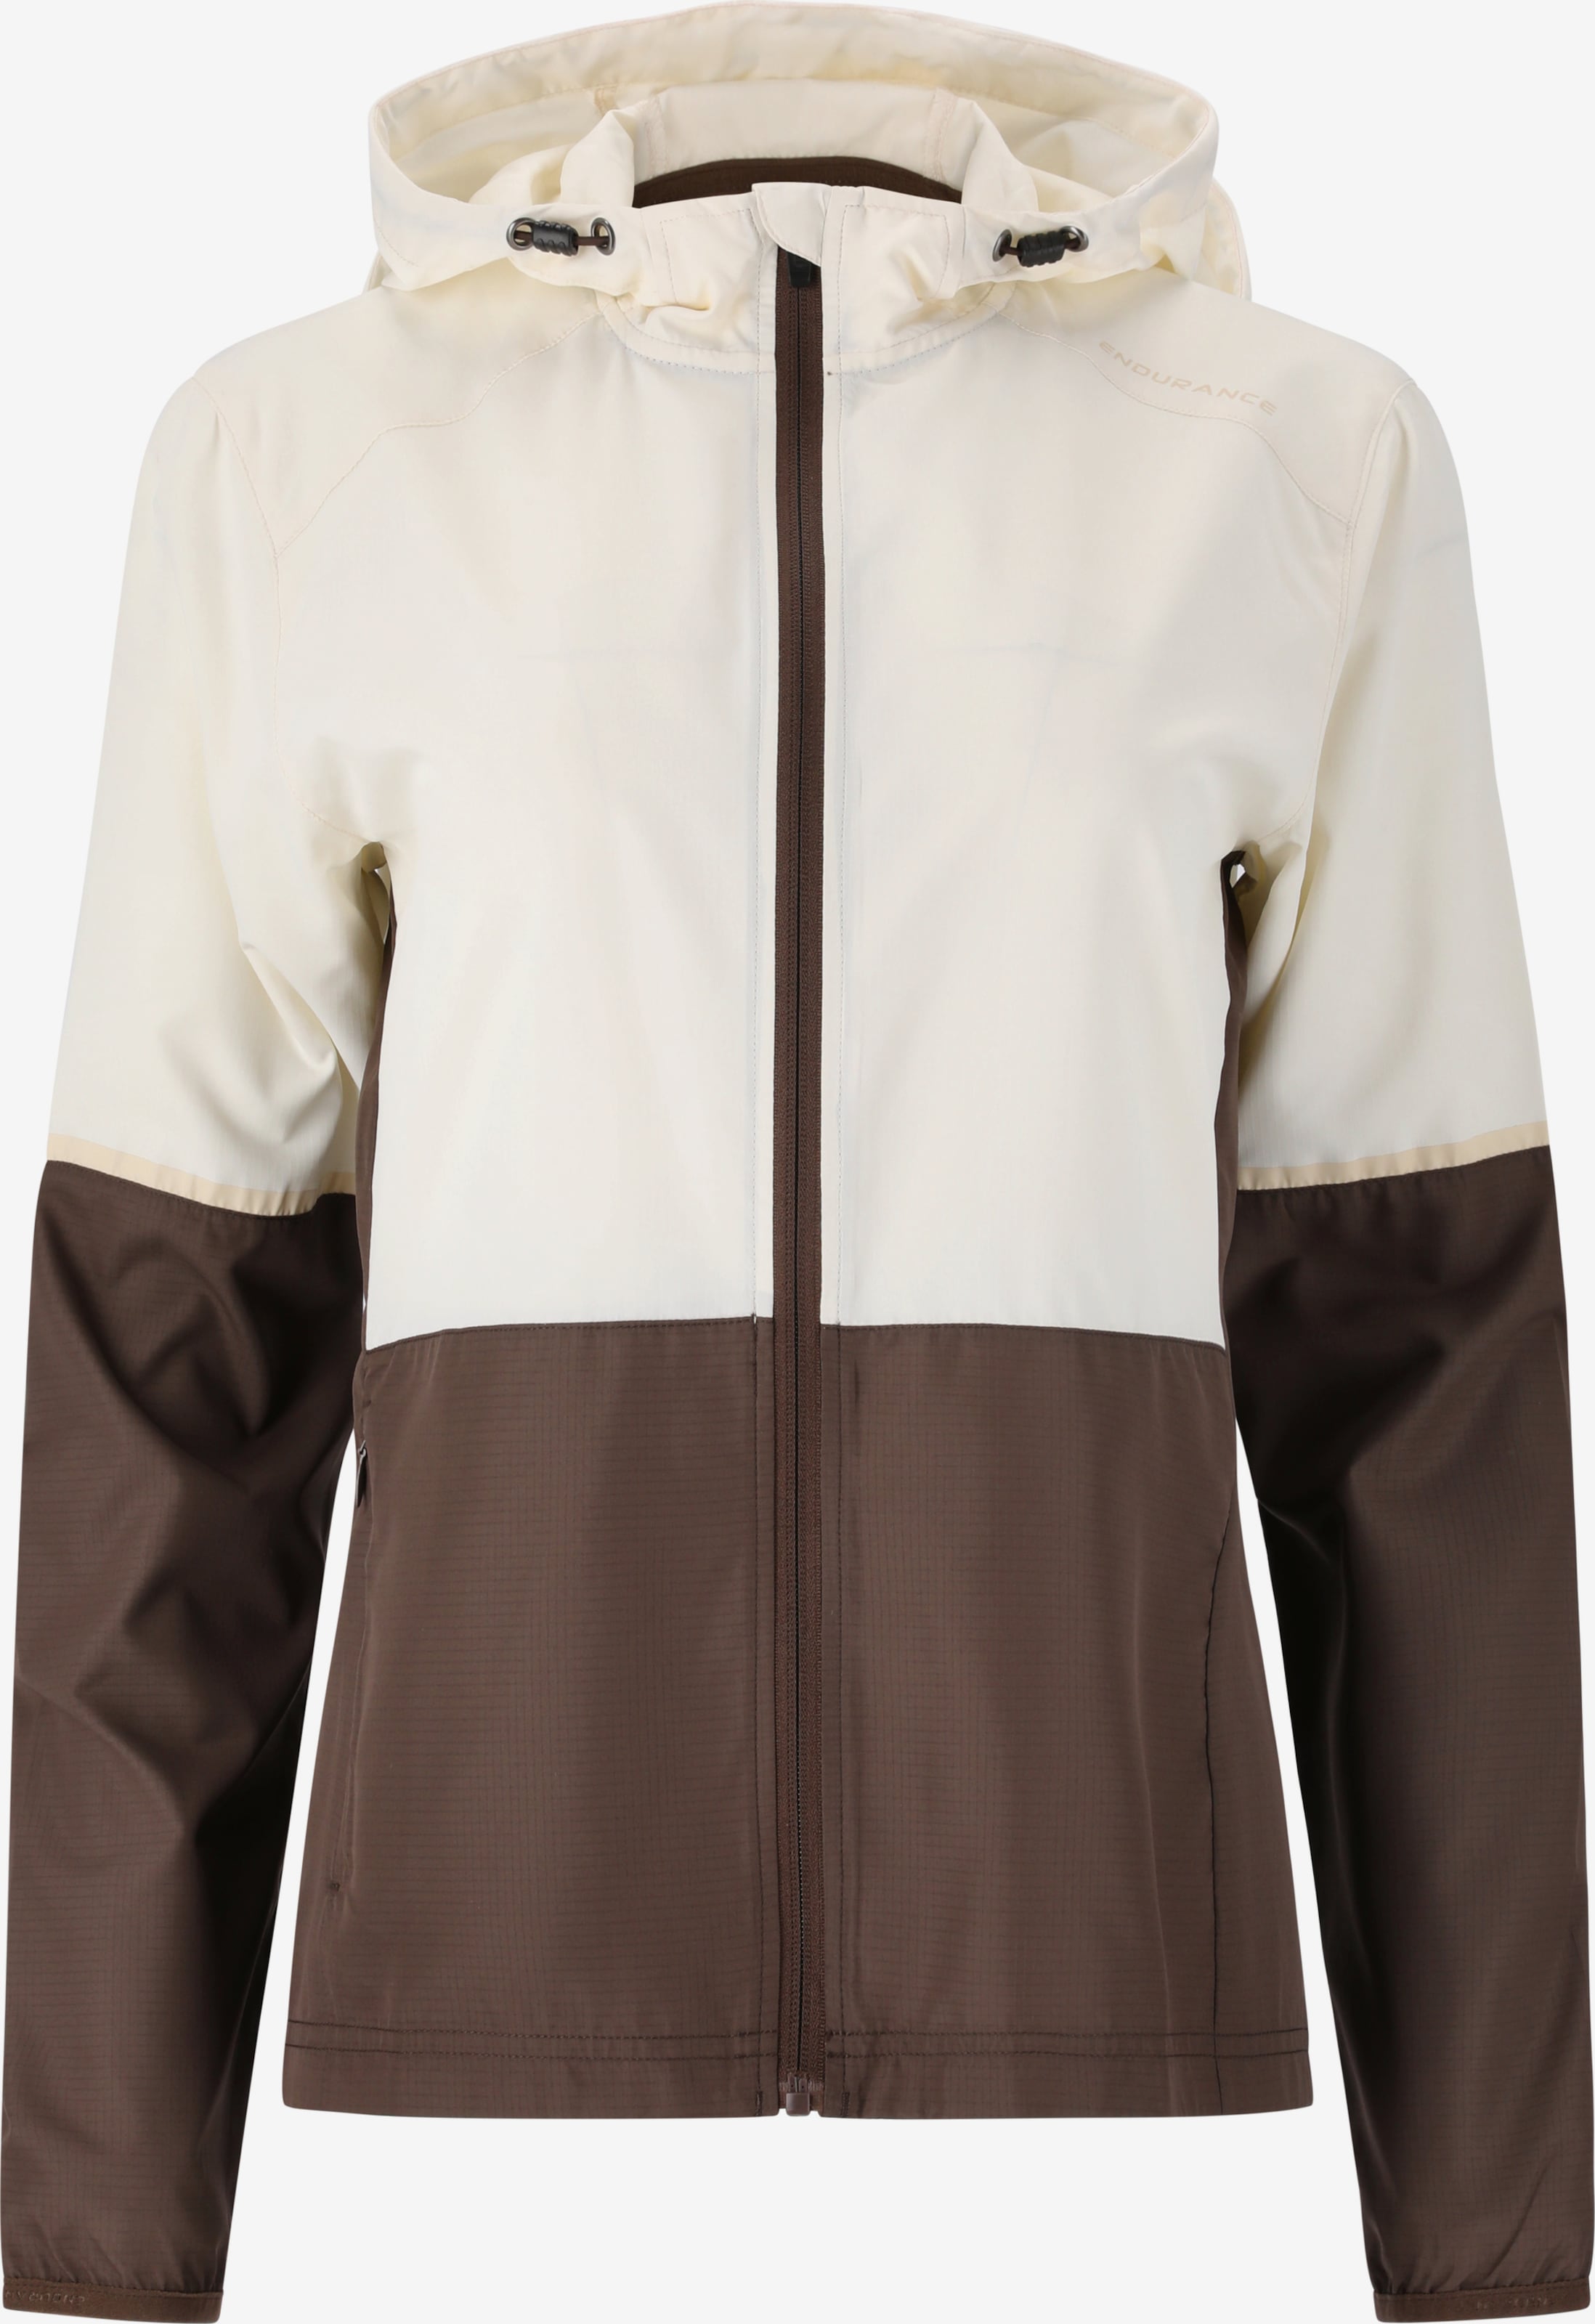 Jacket ABOUT Athletic in Kinthar\' ENDURANCE Beige YOU \' |